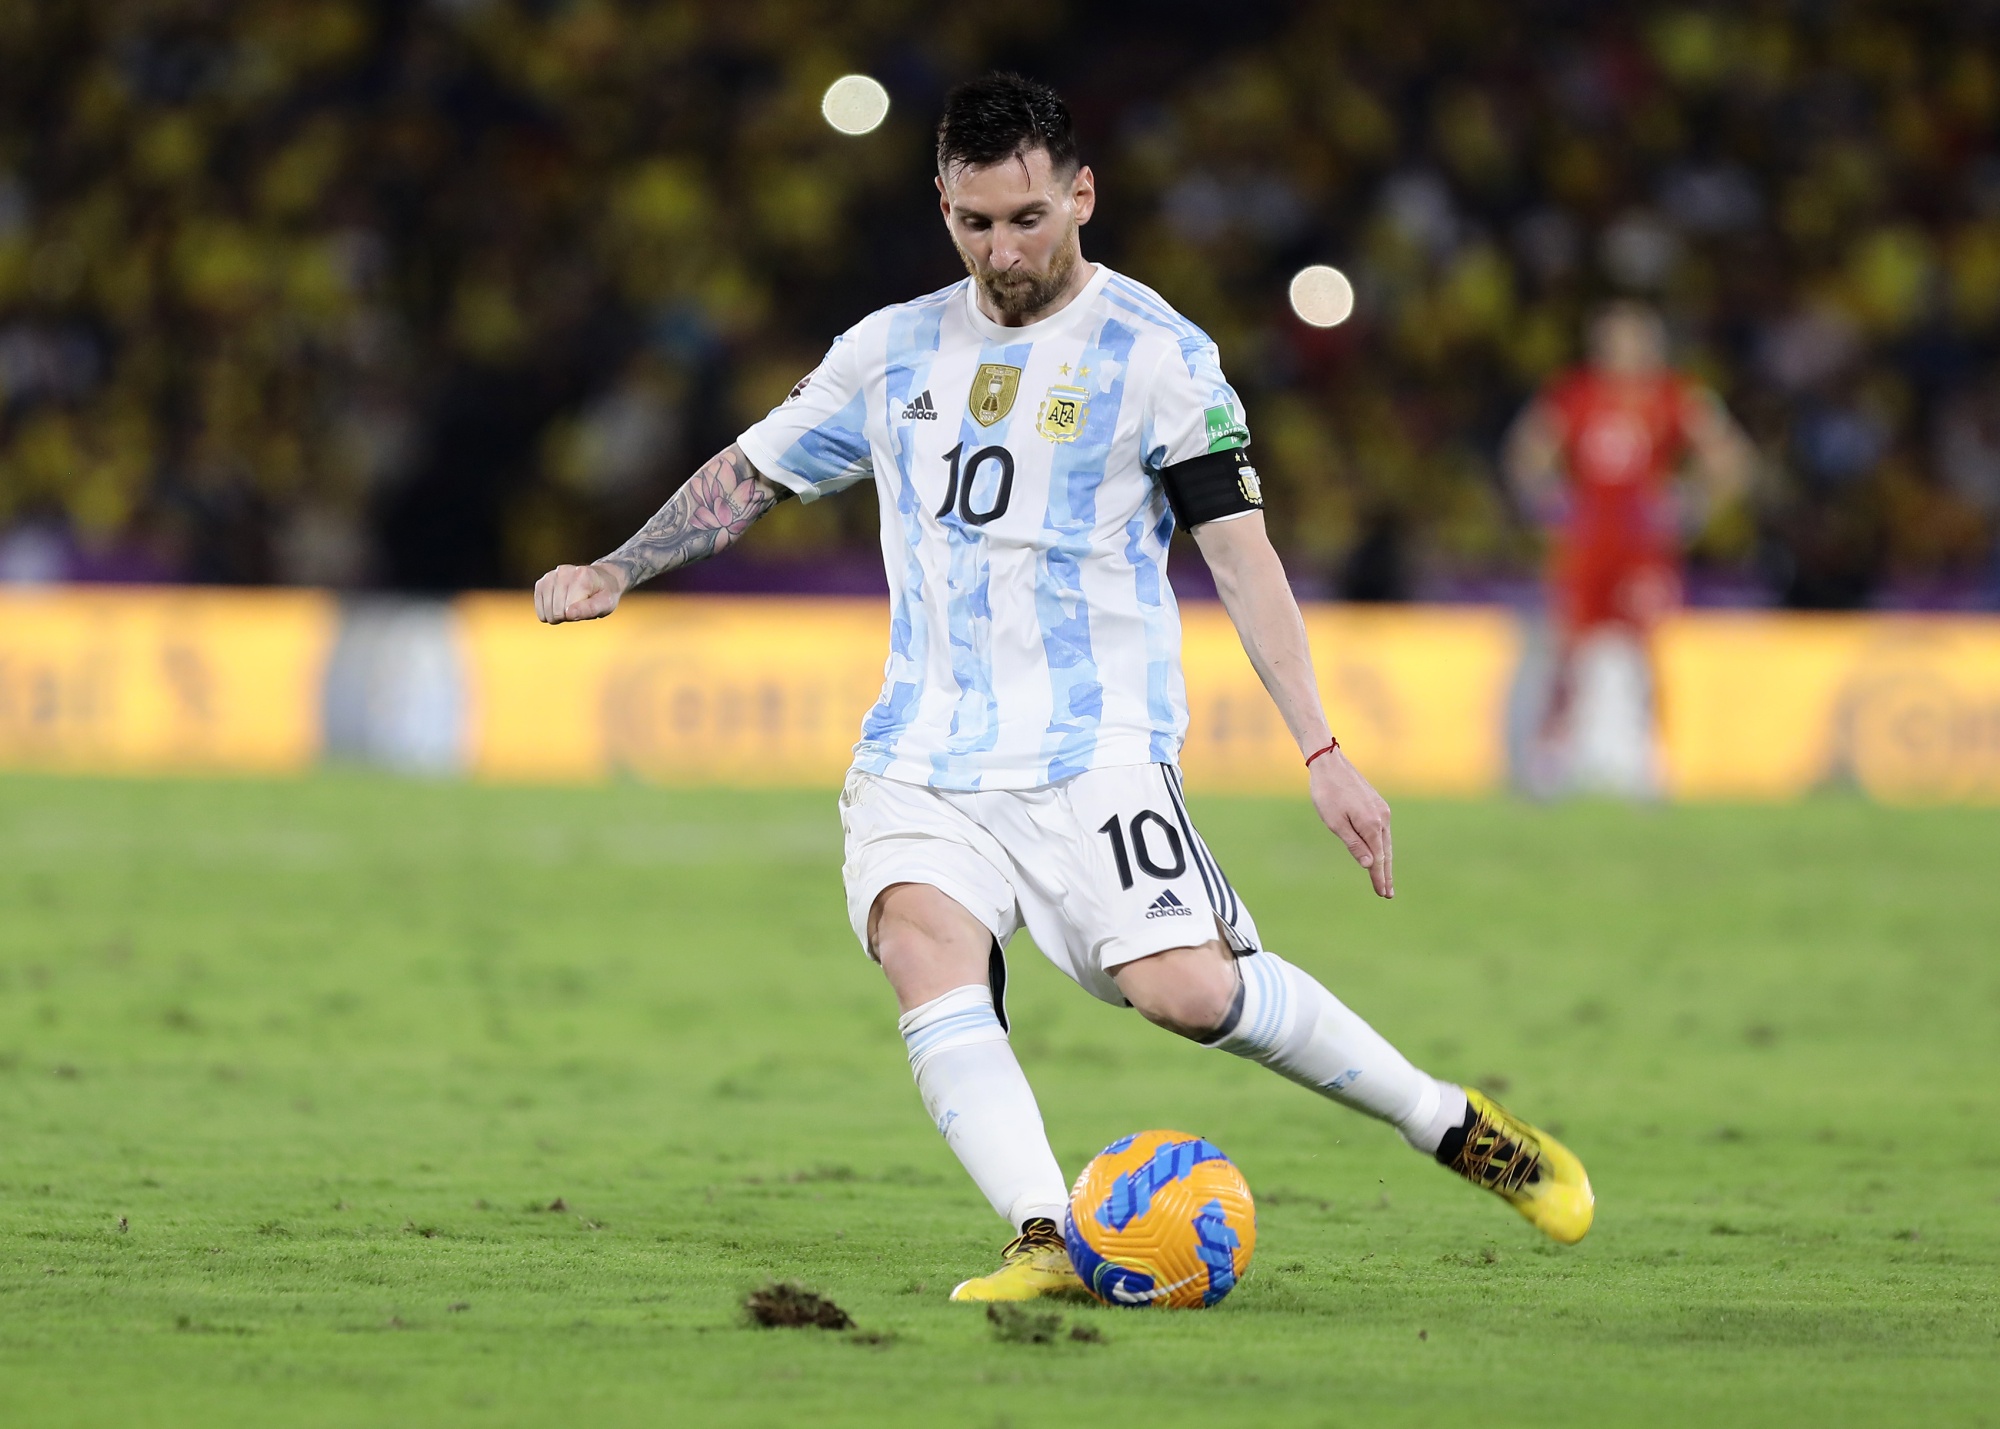 Messi's best games for Argentina: From tearing the USMNT apart to salvaging  World Cup qualification